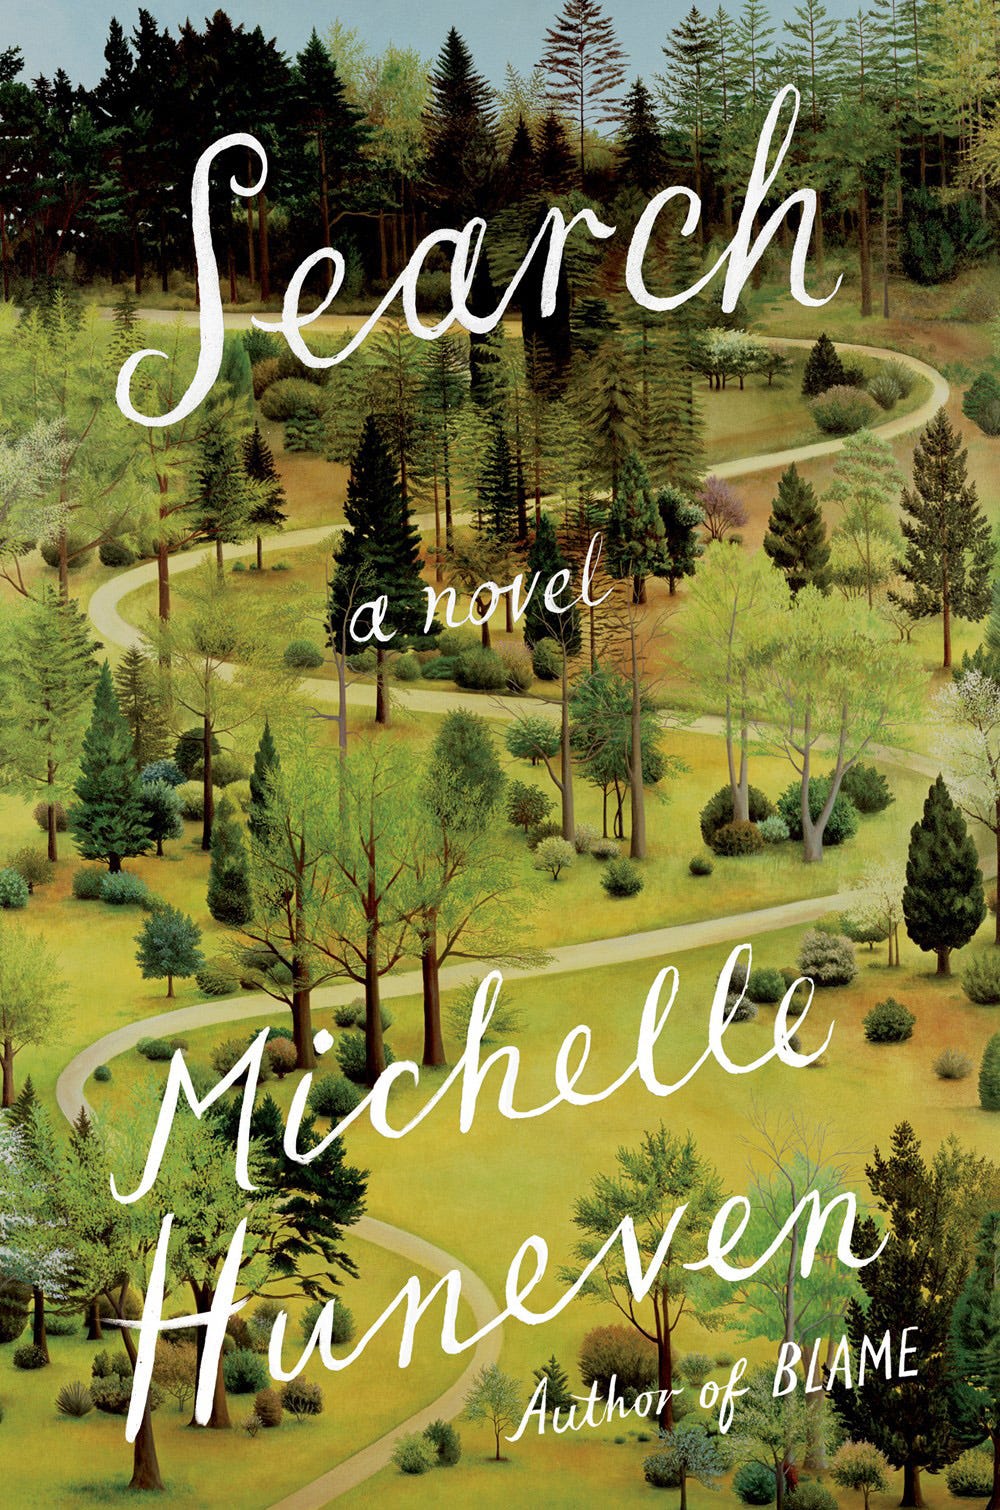 Book review of Search by Michelle Huneven